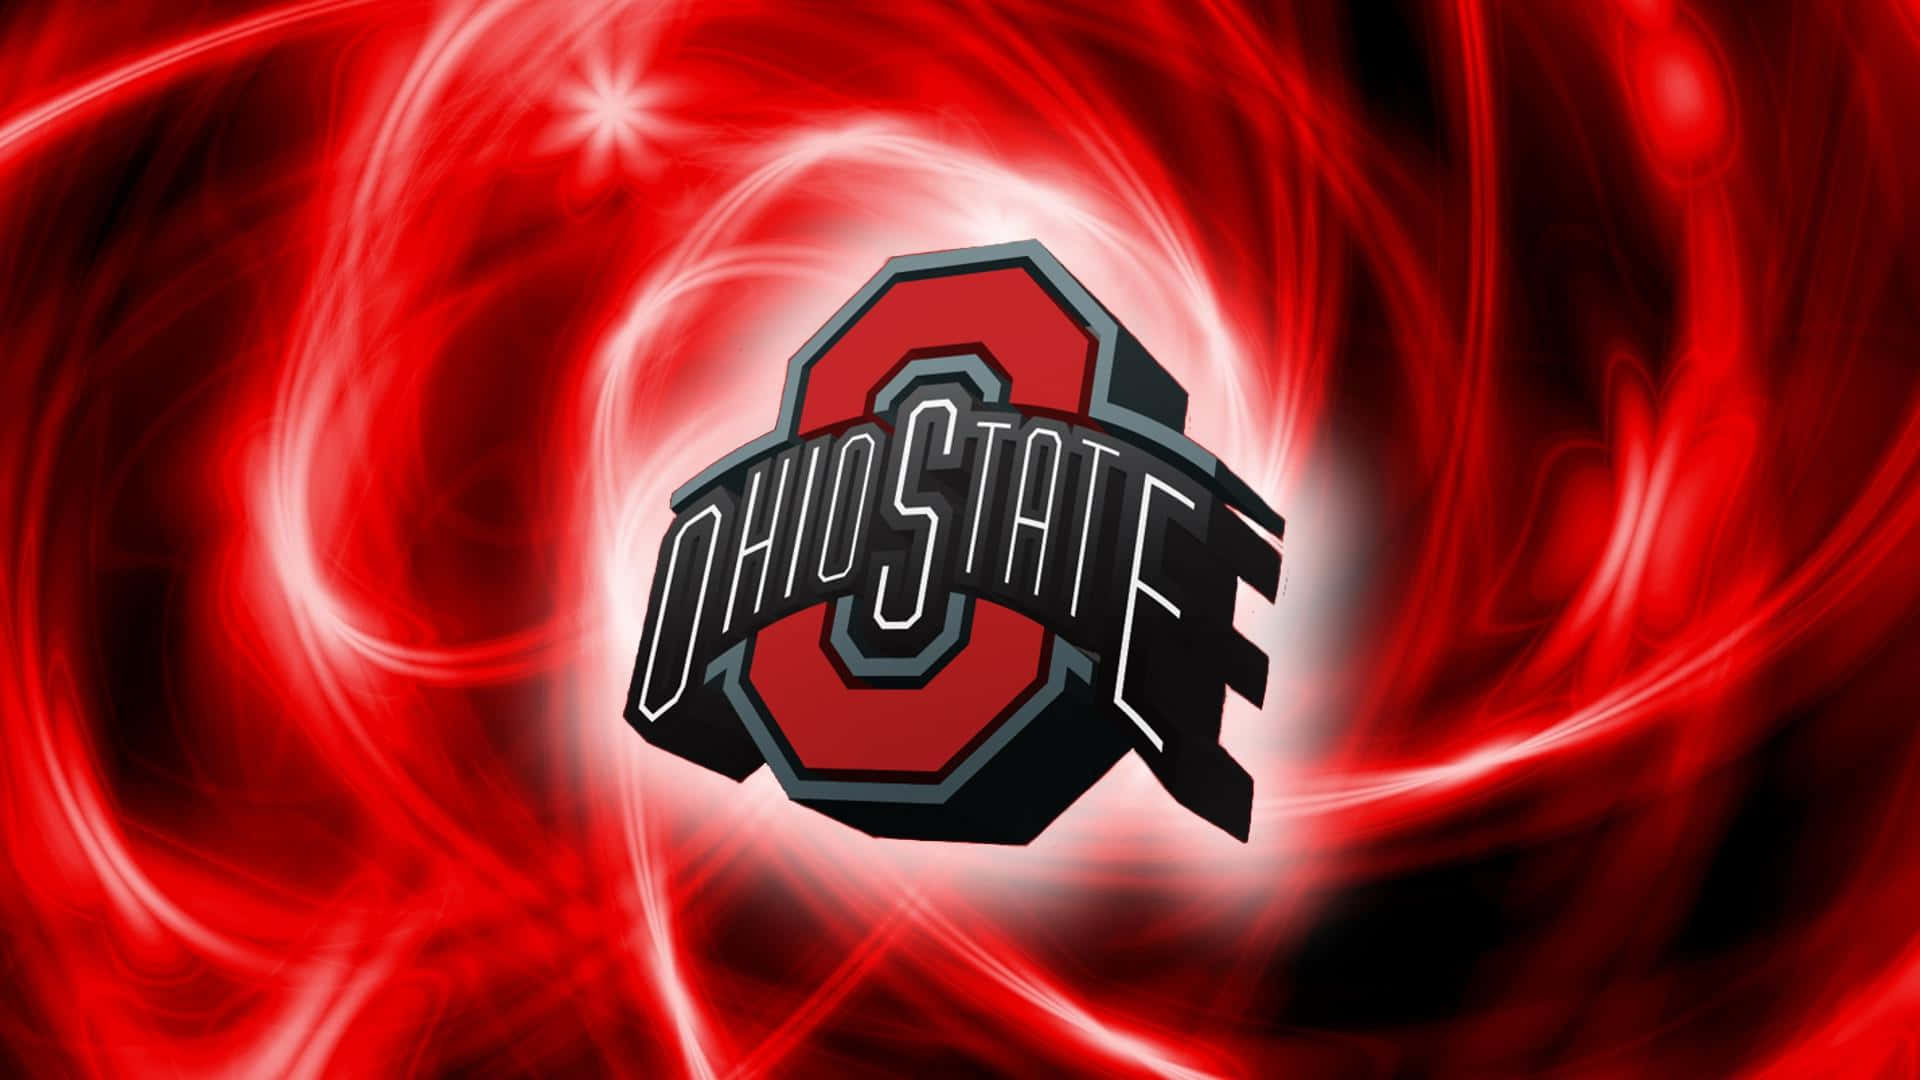 Se cool ud med stylin 'Ohio State stolthed! Wallpaper